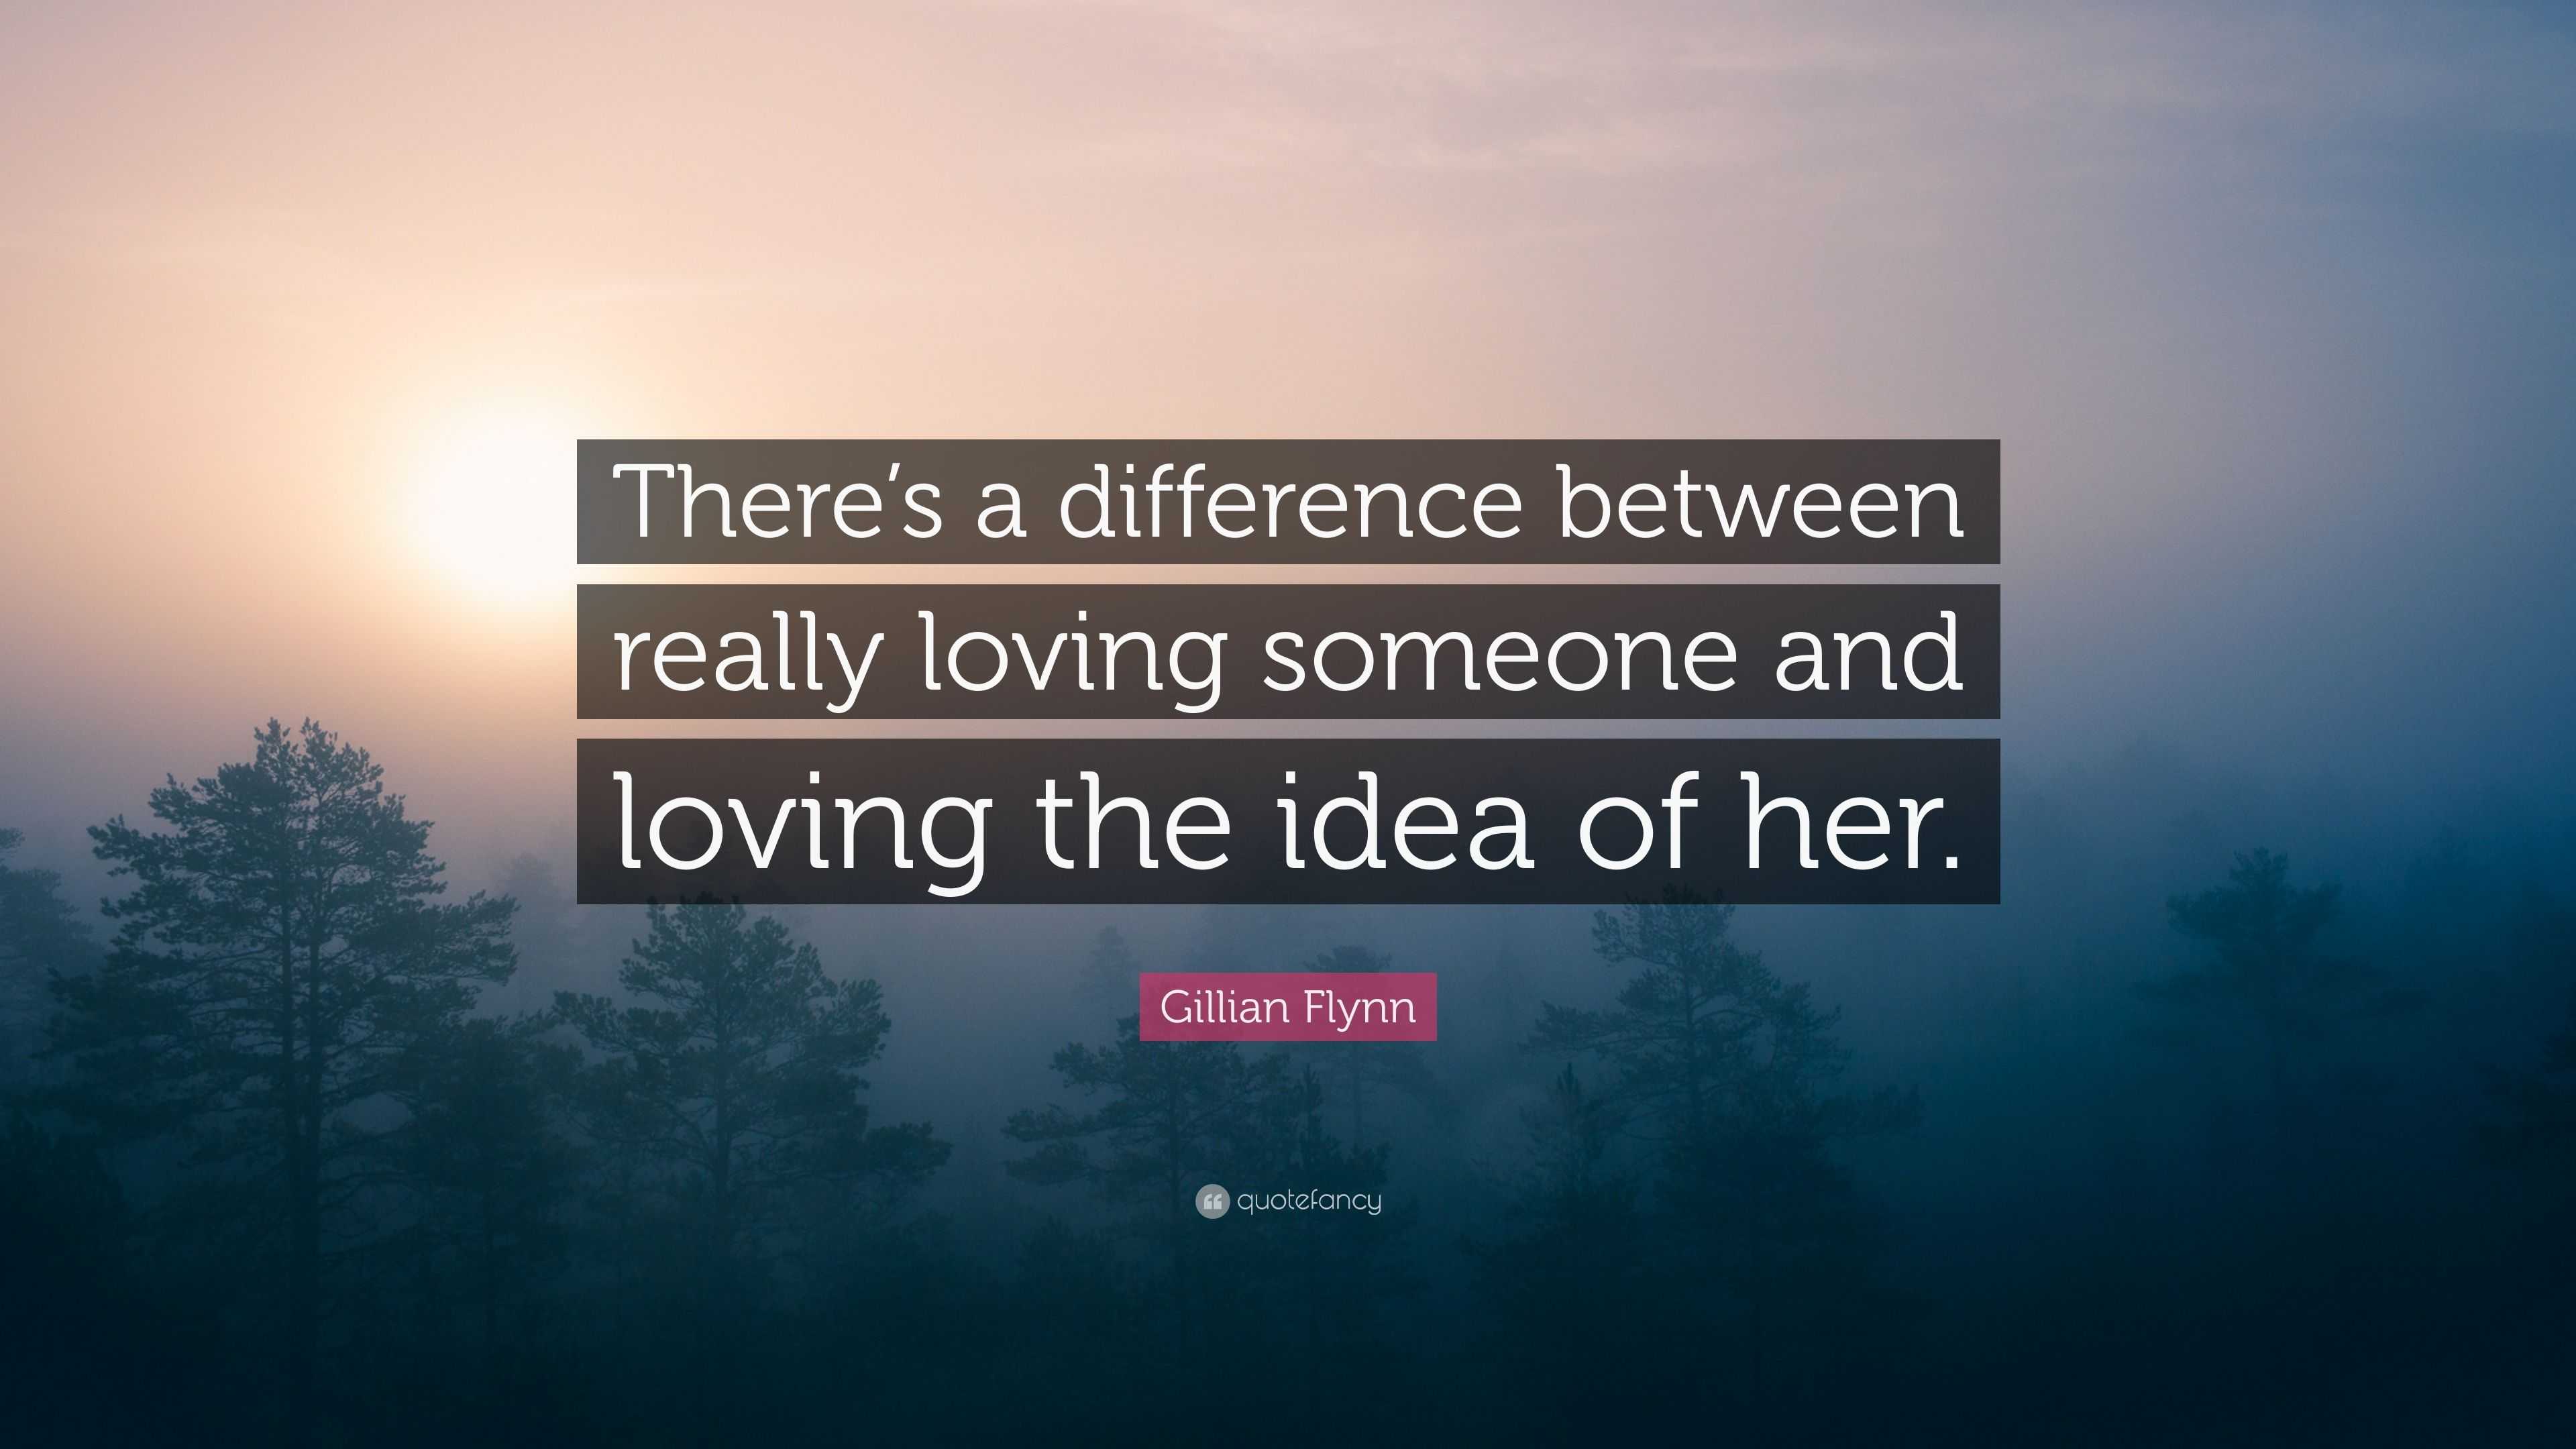 Gillian Flynn Quote: “There’s a difference between really loving ...